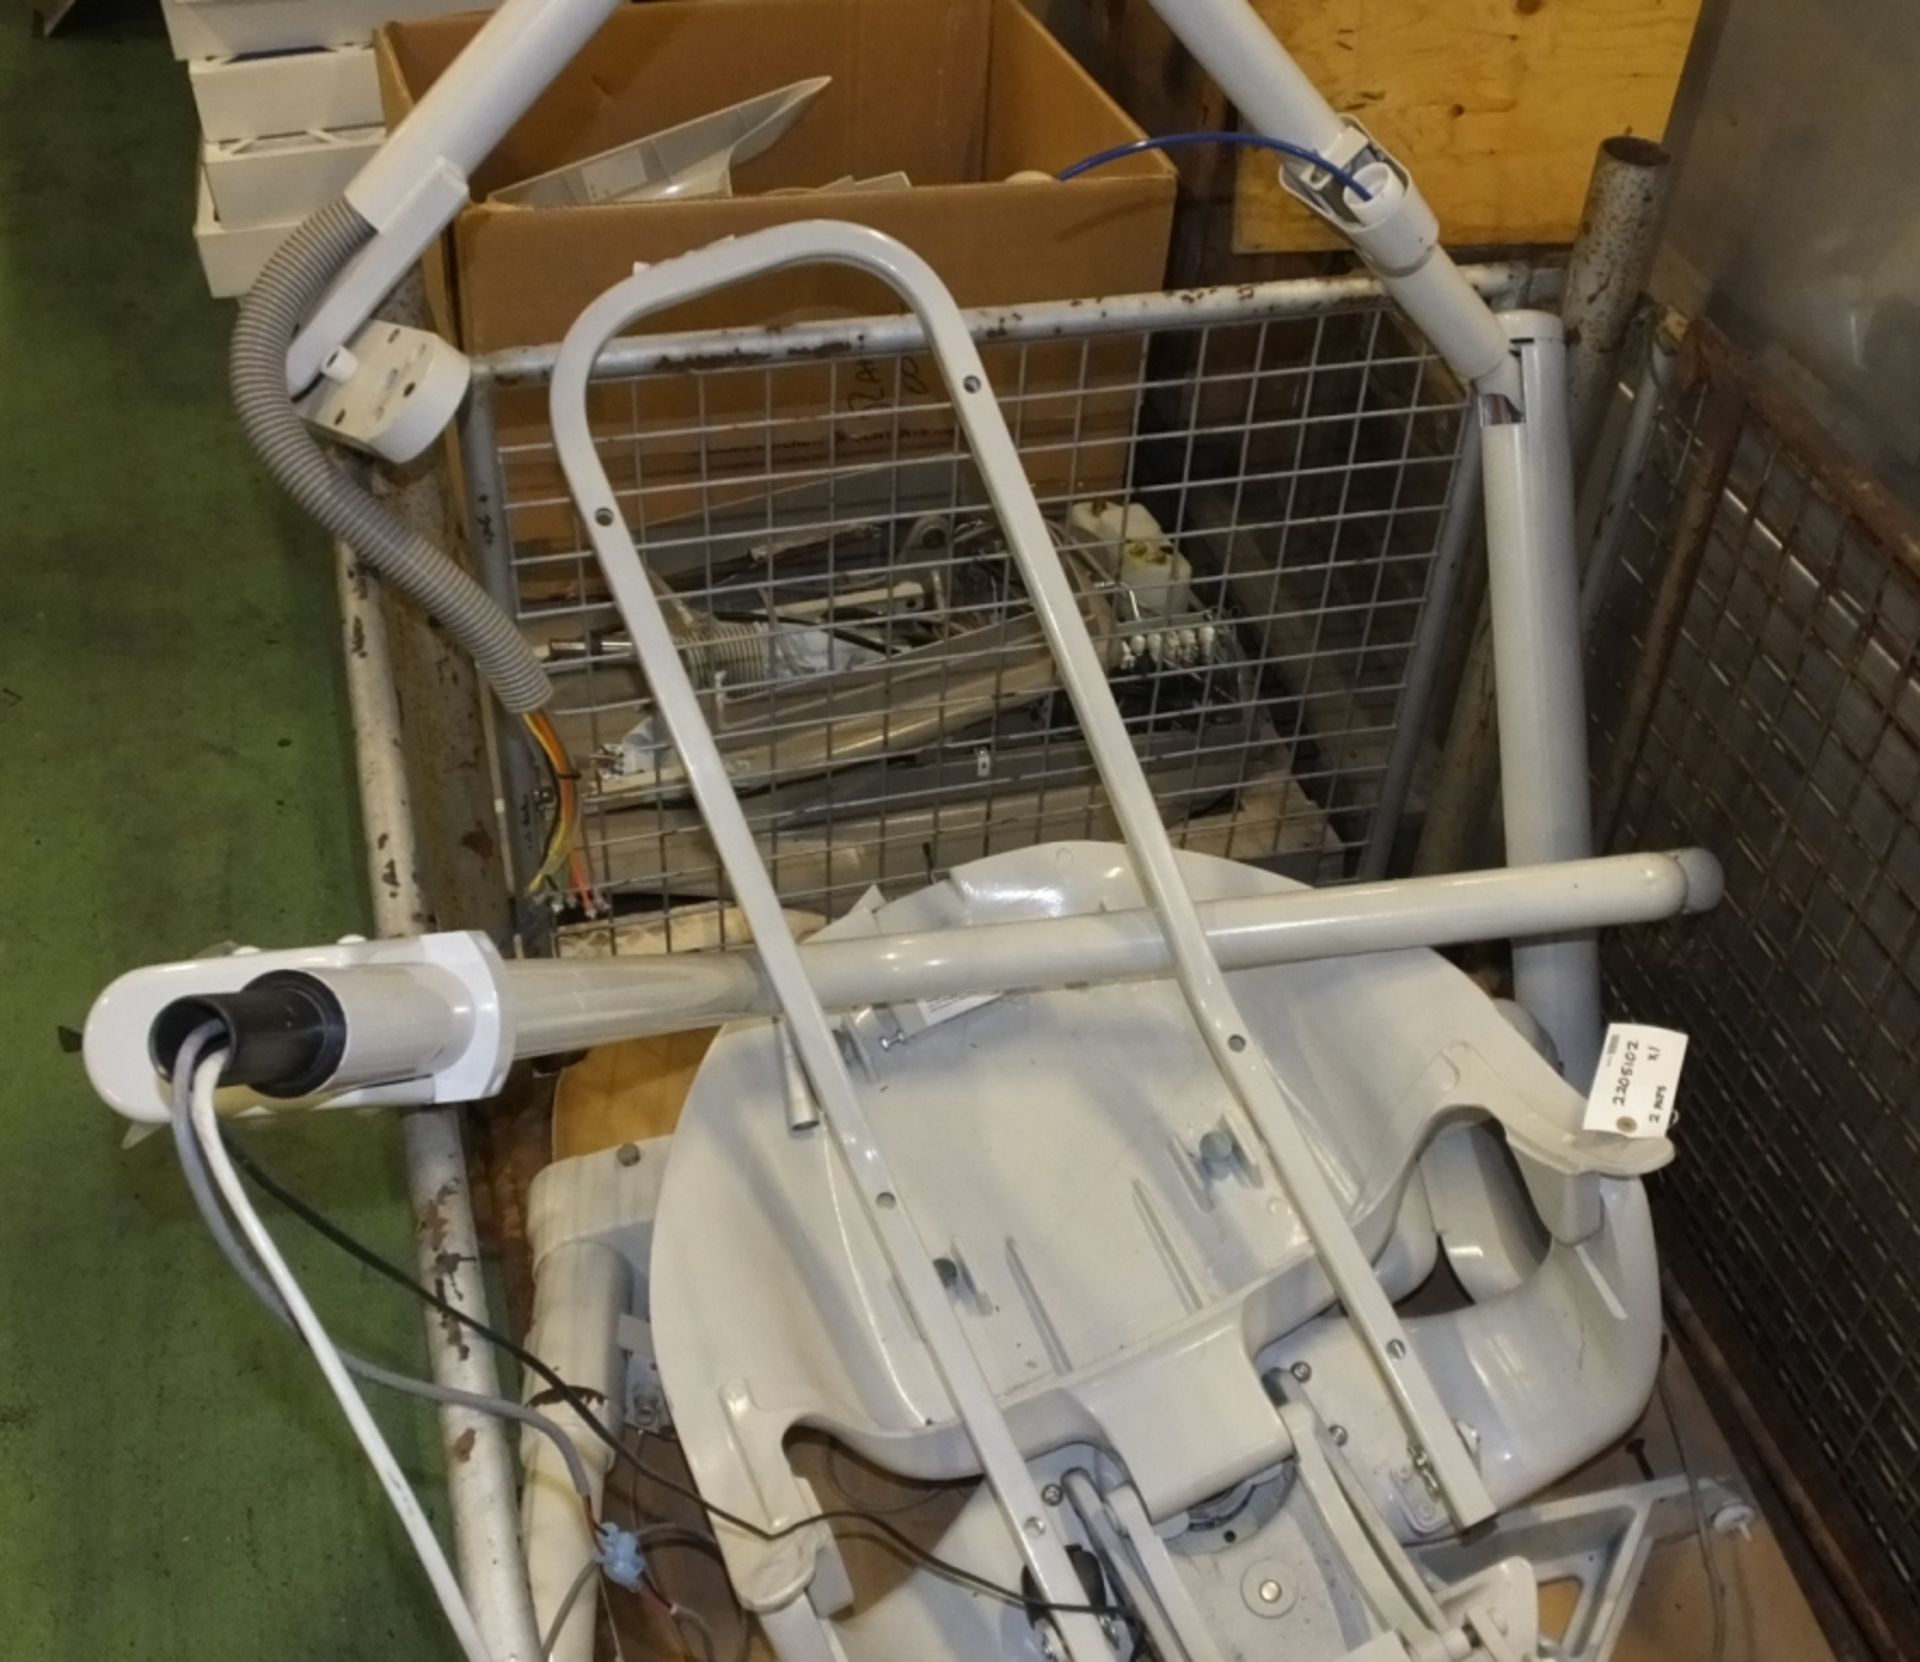 Midmark Dental Operating Chair - disassembled - 2 pallets - Image 3 of 5